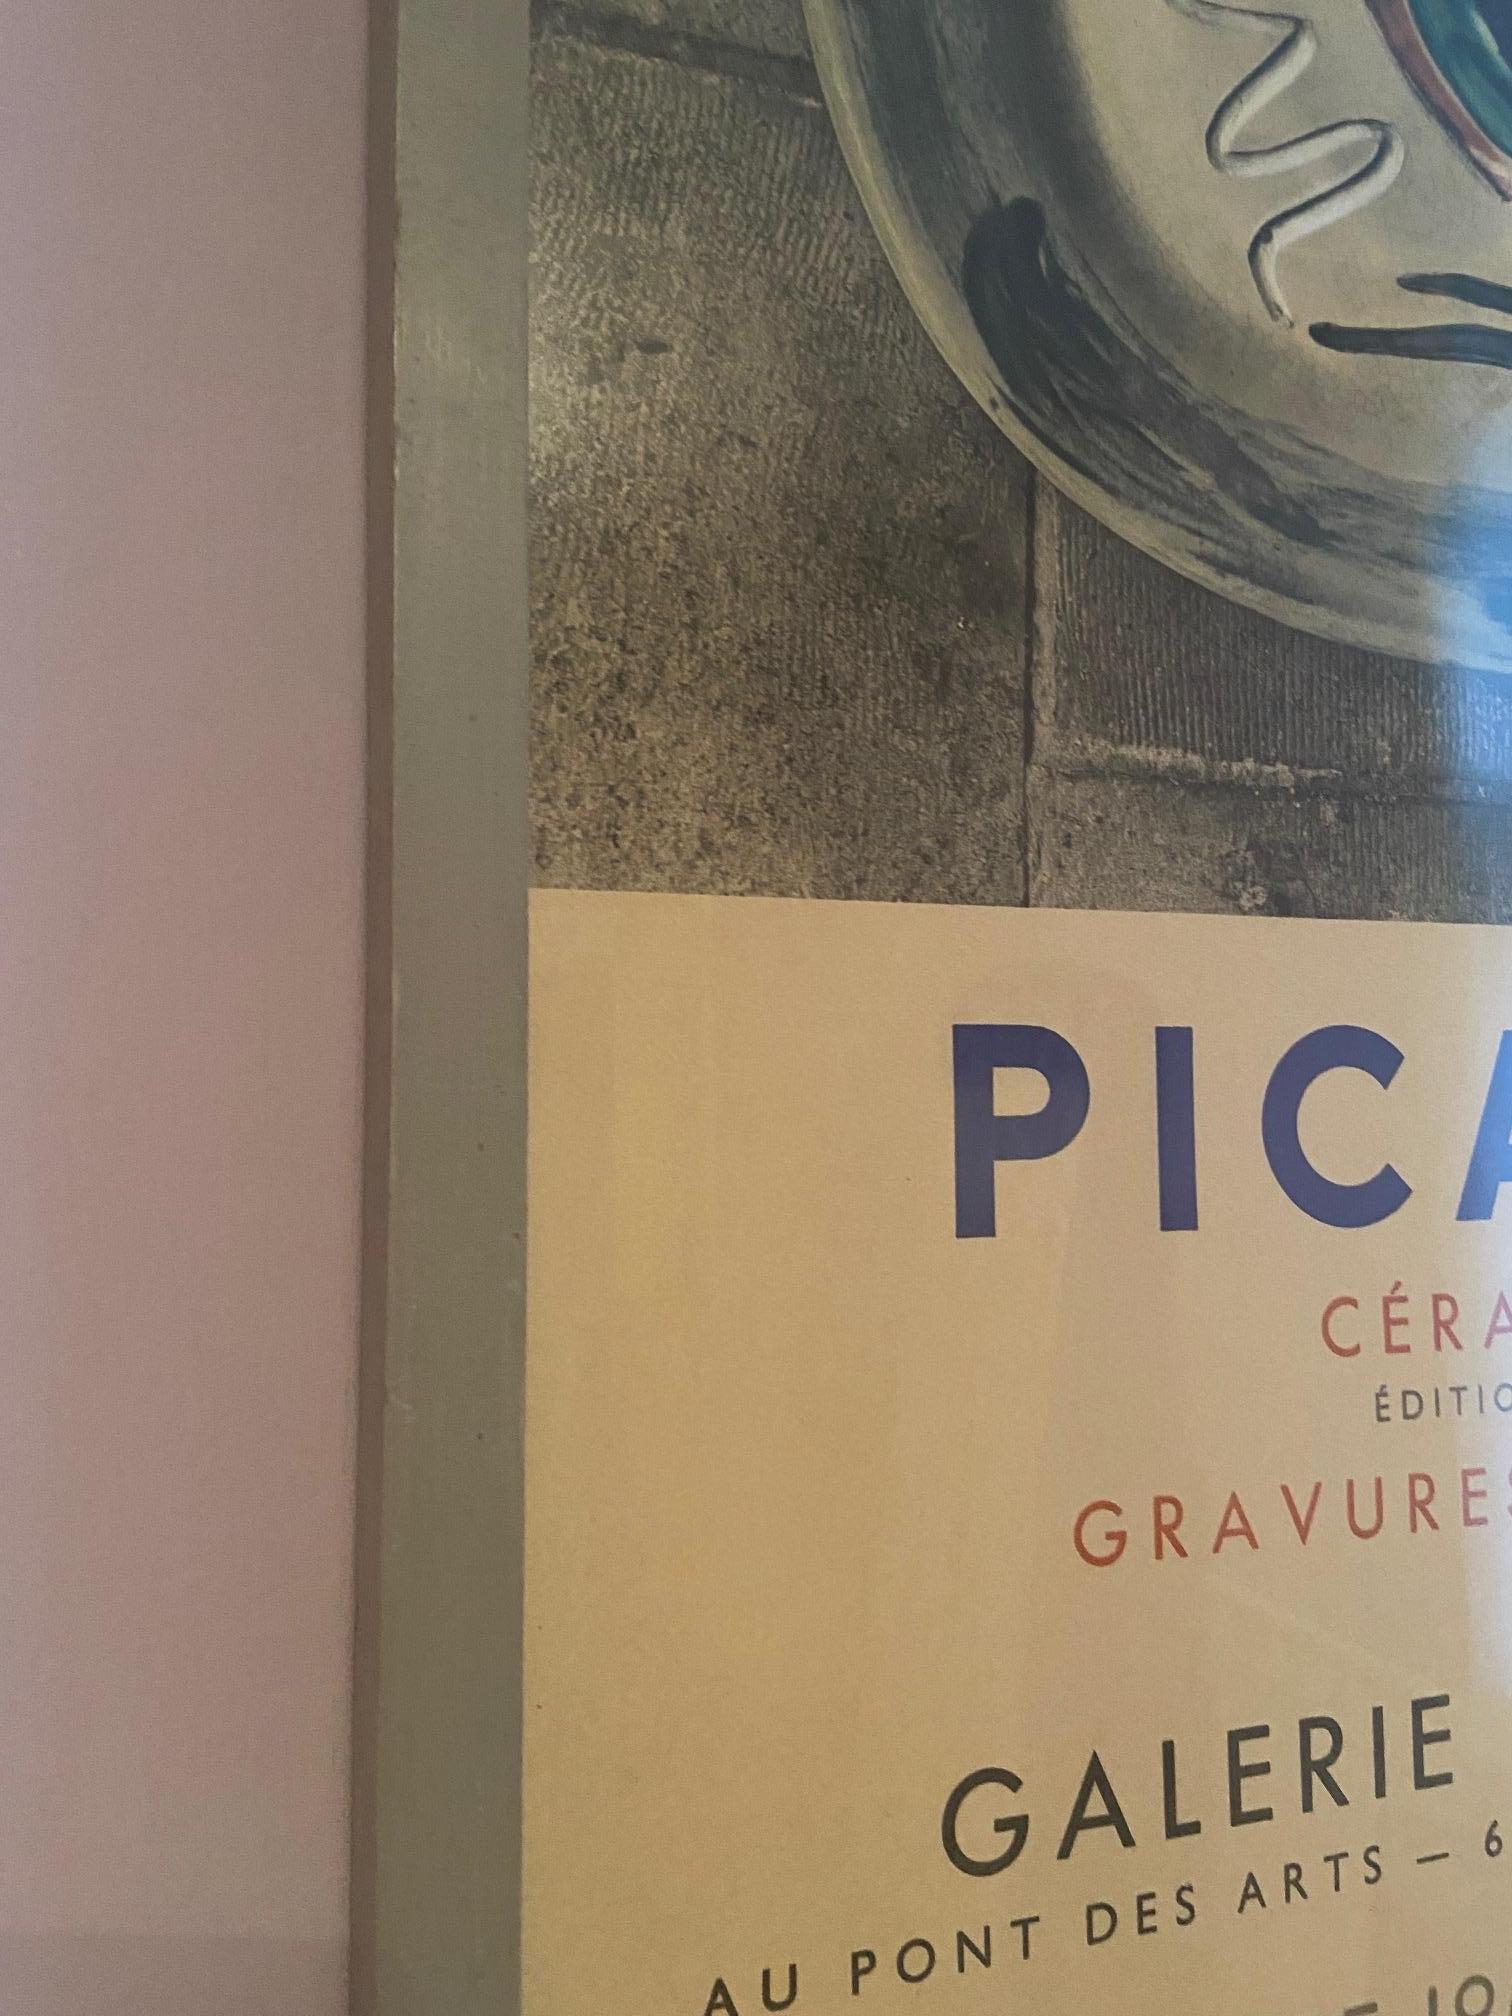 Vintage Poster Pablo Picasso “Picasso Ceramics” Galleri Lucie Weill, France 1976 1